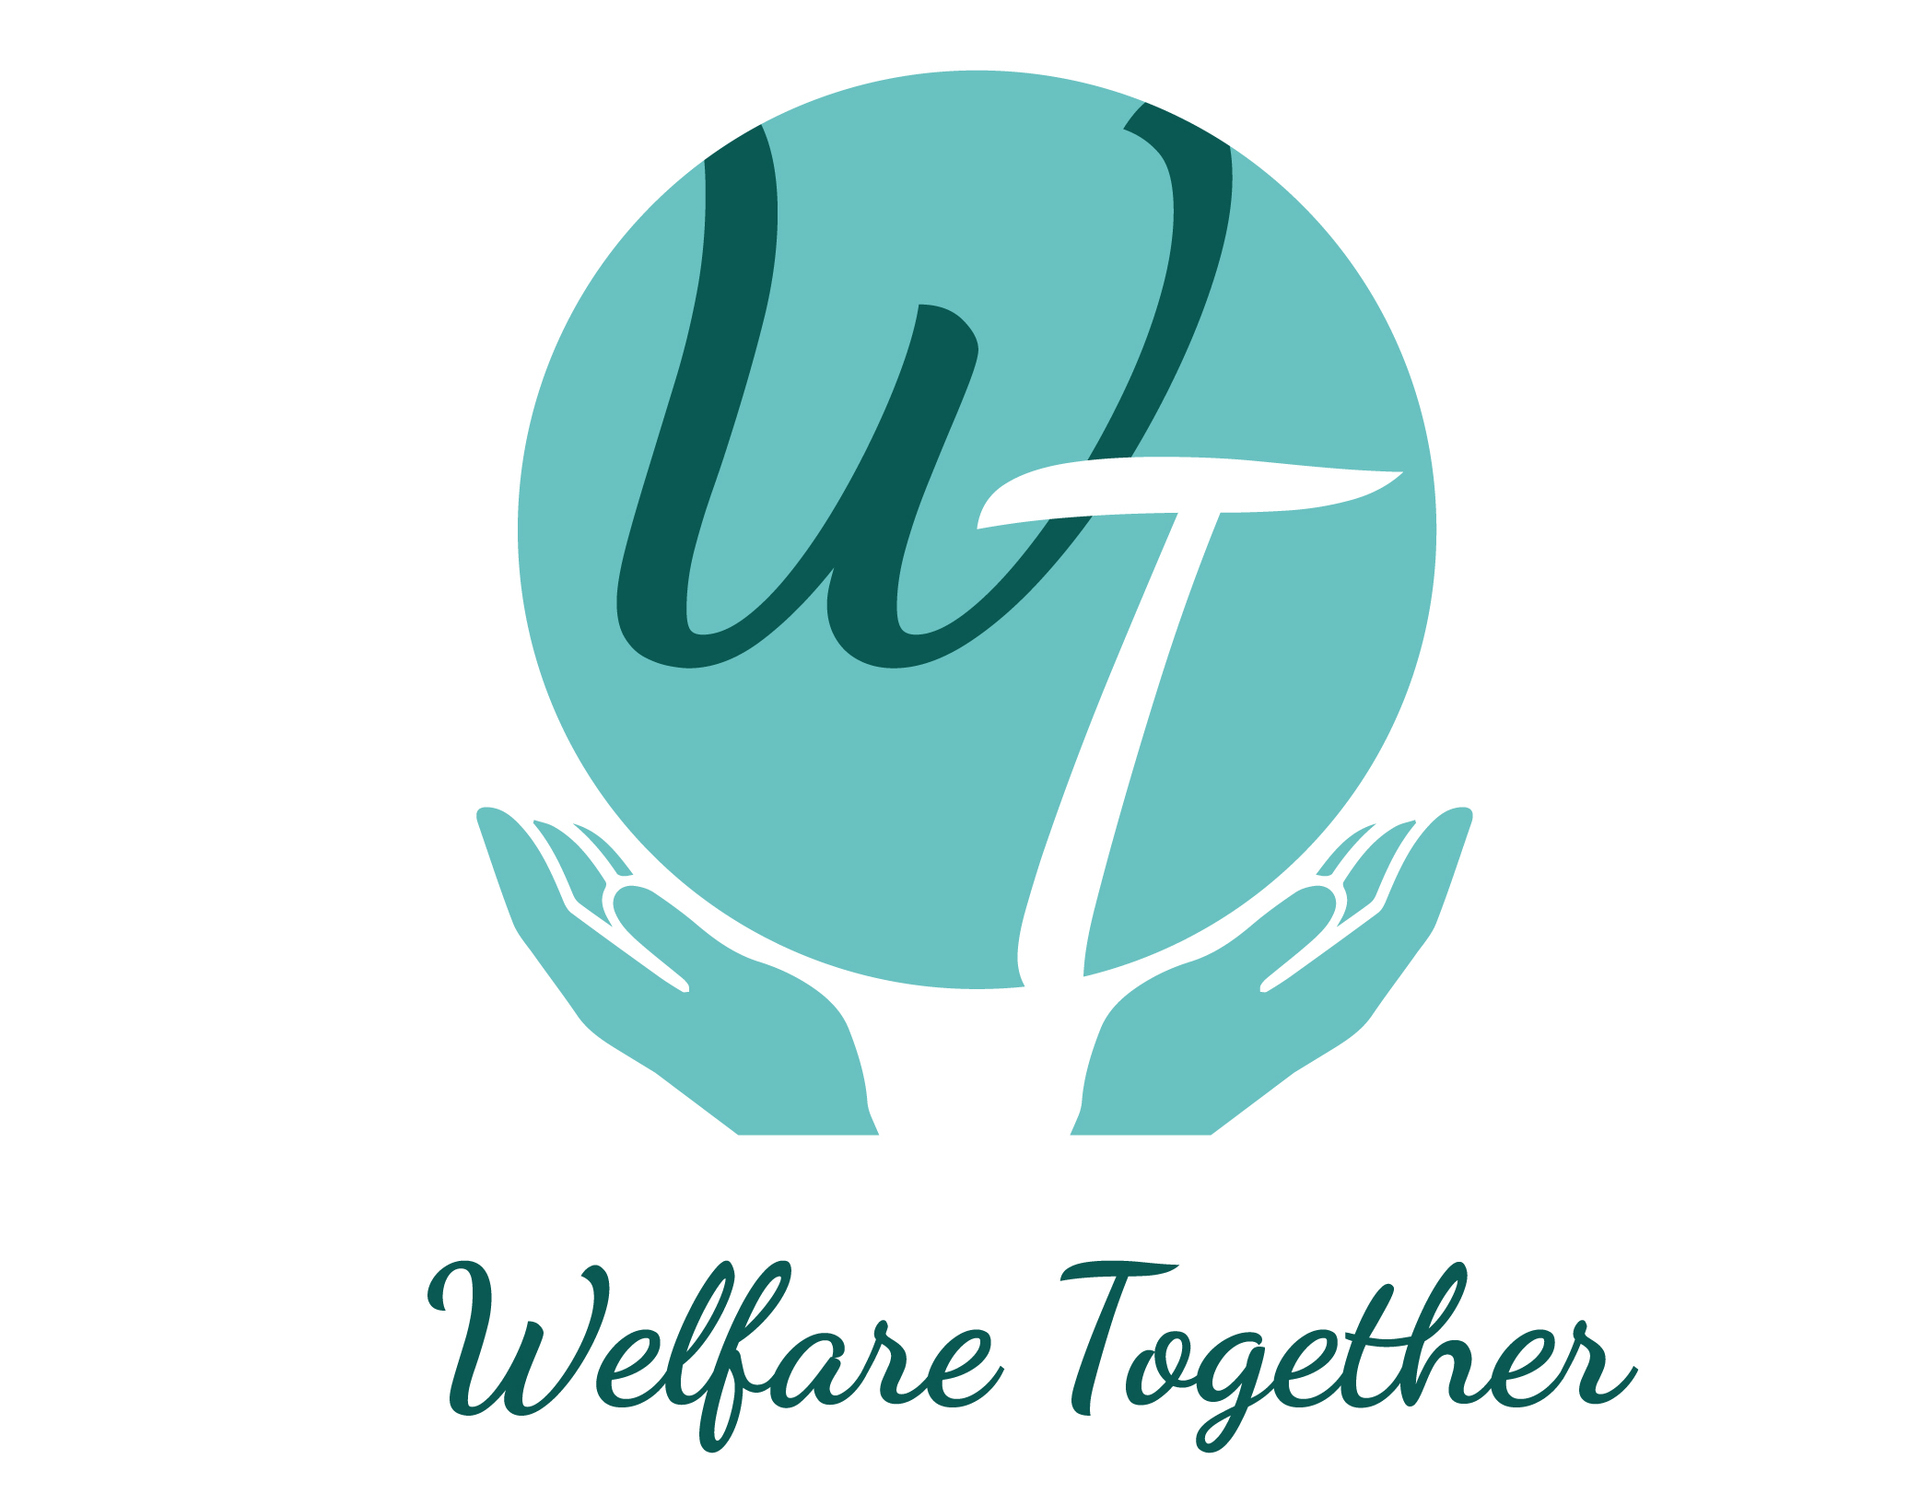 IT Case Study for Welfare Together